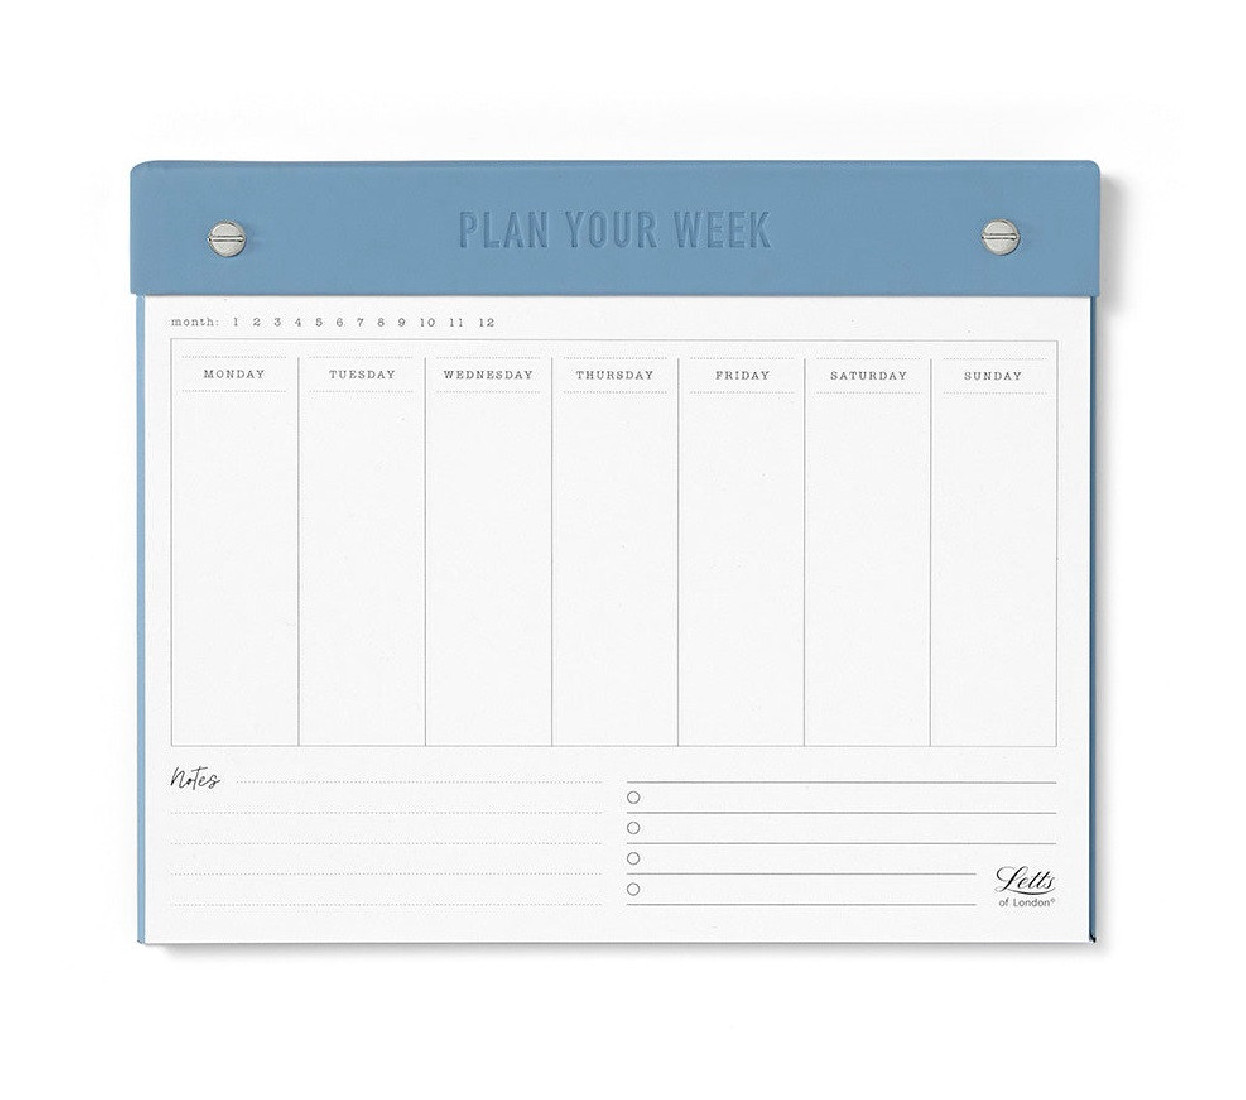 Notepad Conscious Weekly Planner 990255 Letts